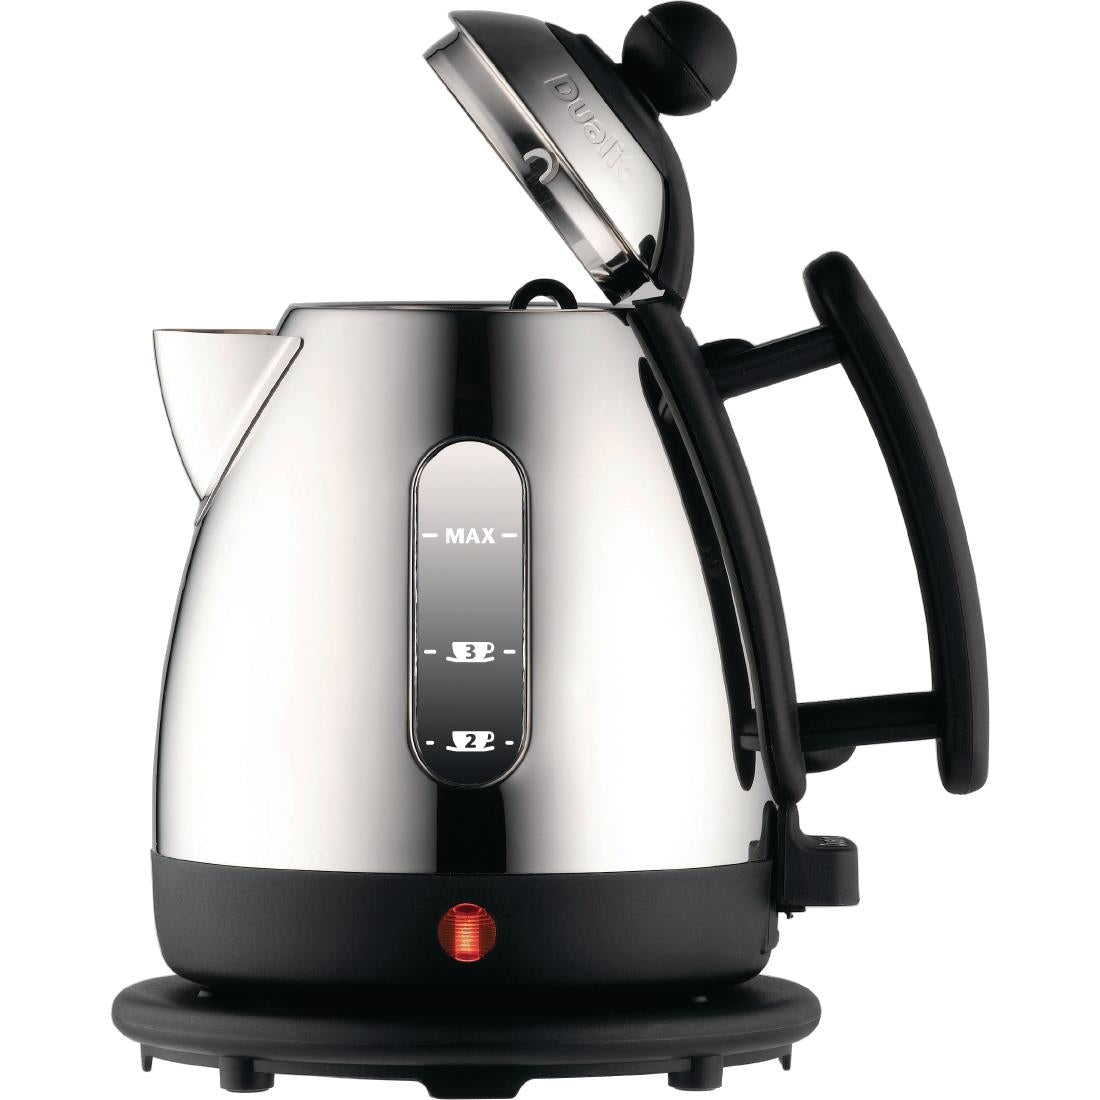 CE339 Dualit Cordless Kettle 1Ltr 72200 JD Catering Equipment Solutions Ltd